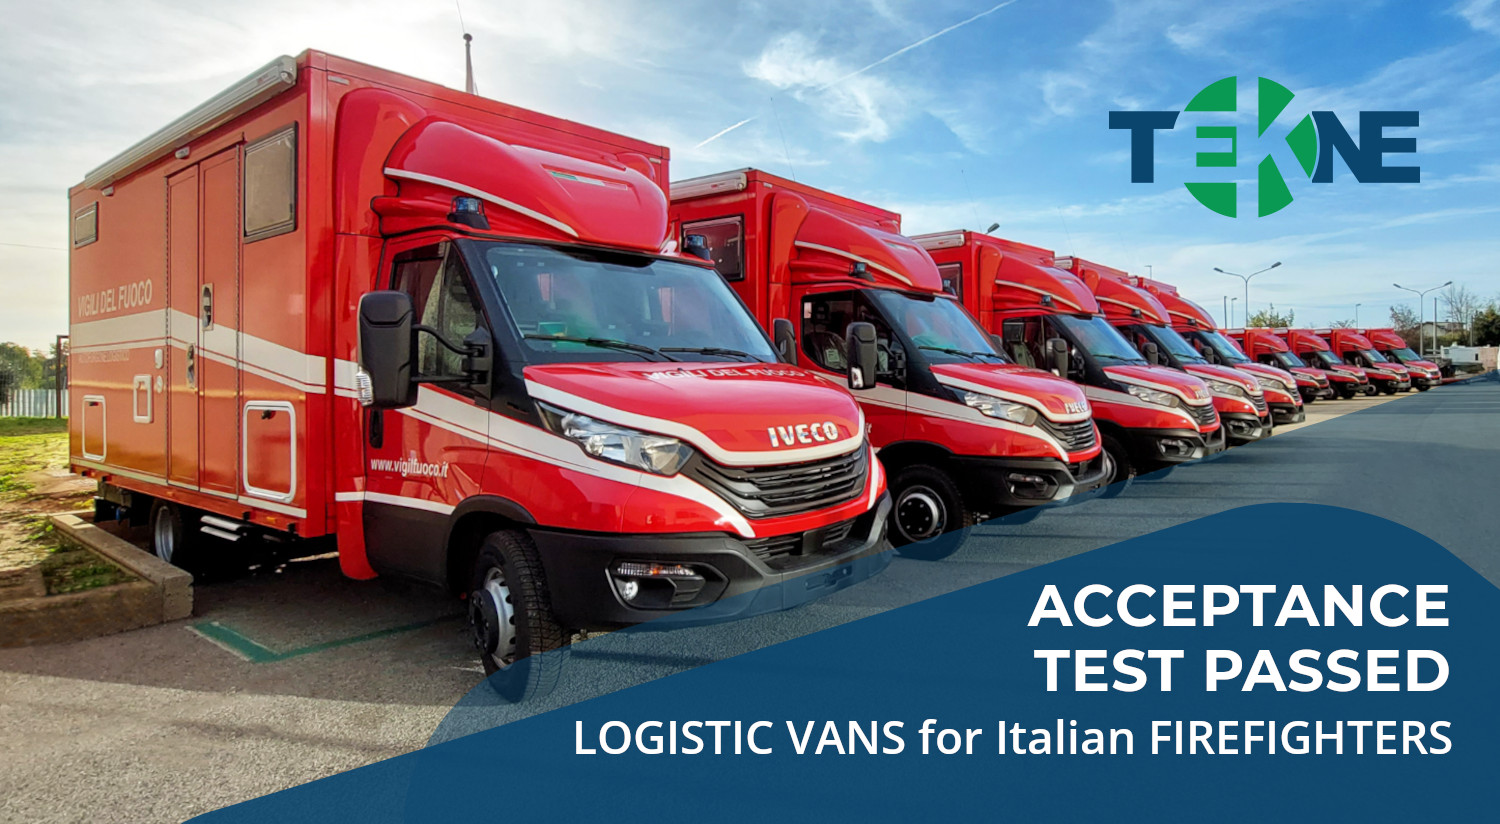 Acceptance test passed for Firefighters LogisticVans